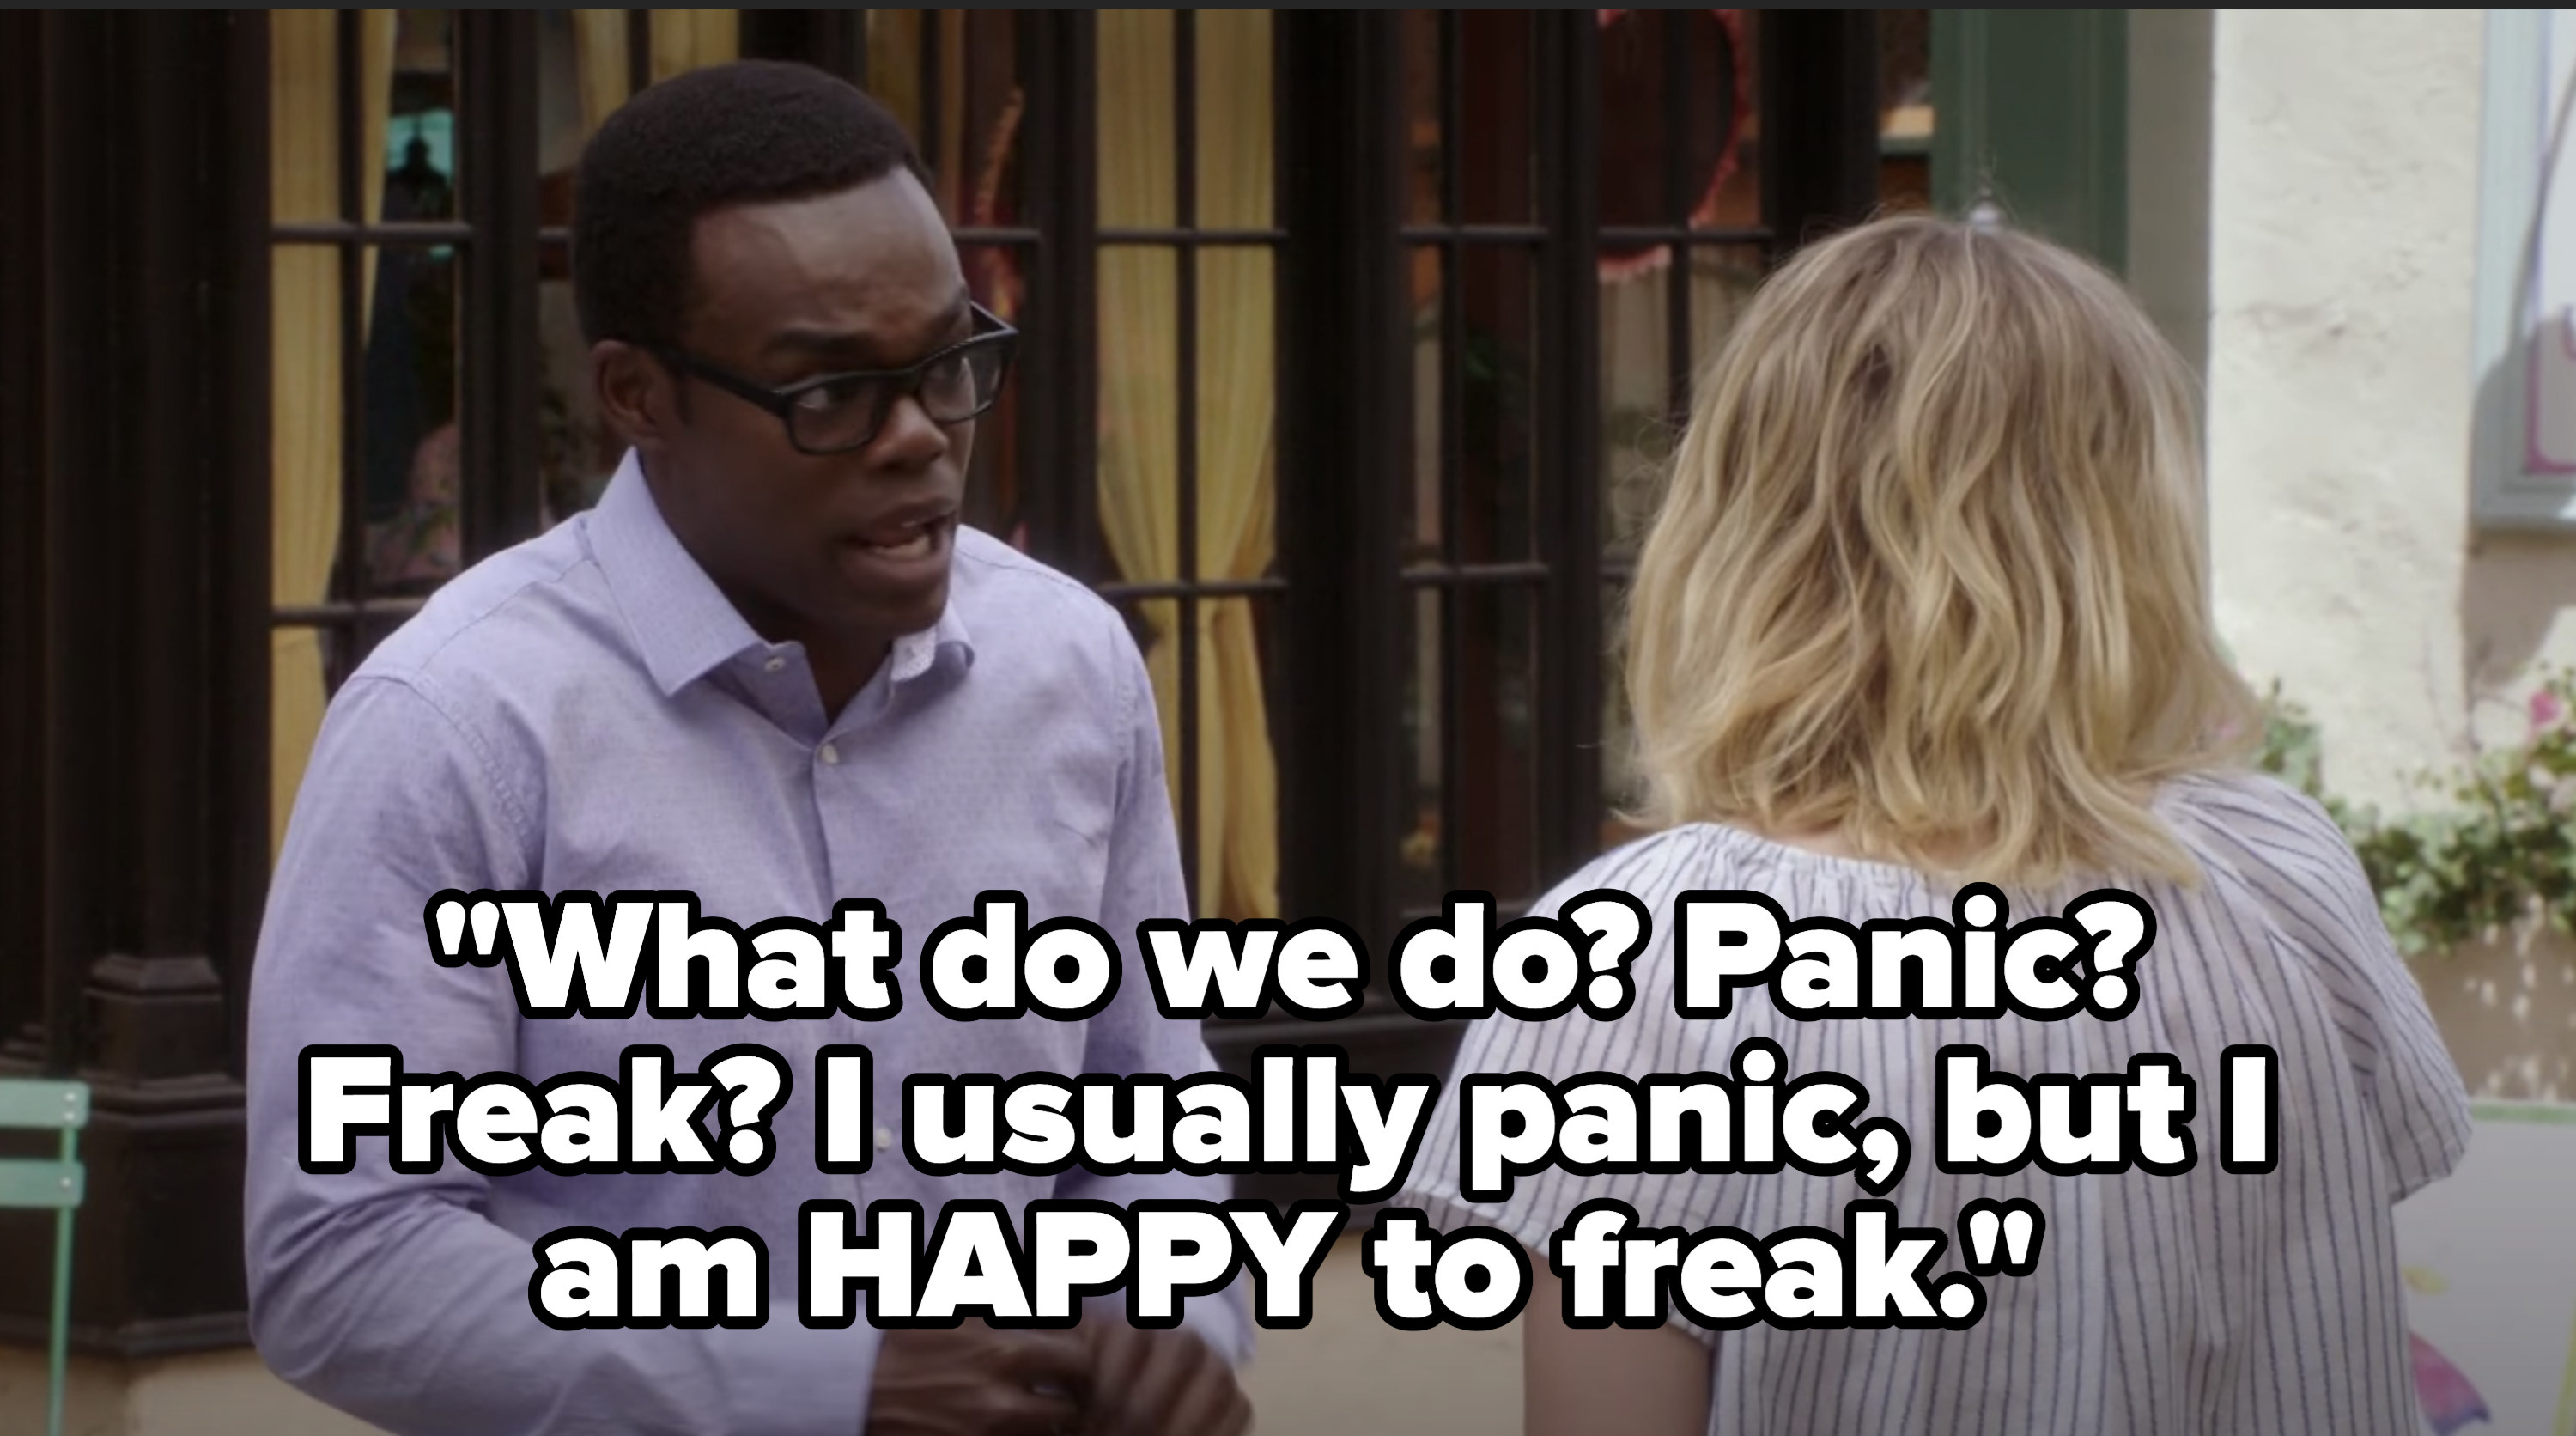 &quot;what do we do? panic? freak? I usually panic, but I am HAPPY to freak&quot;